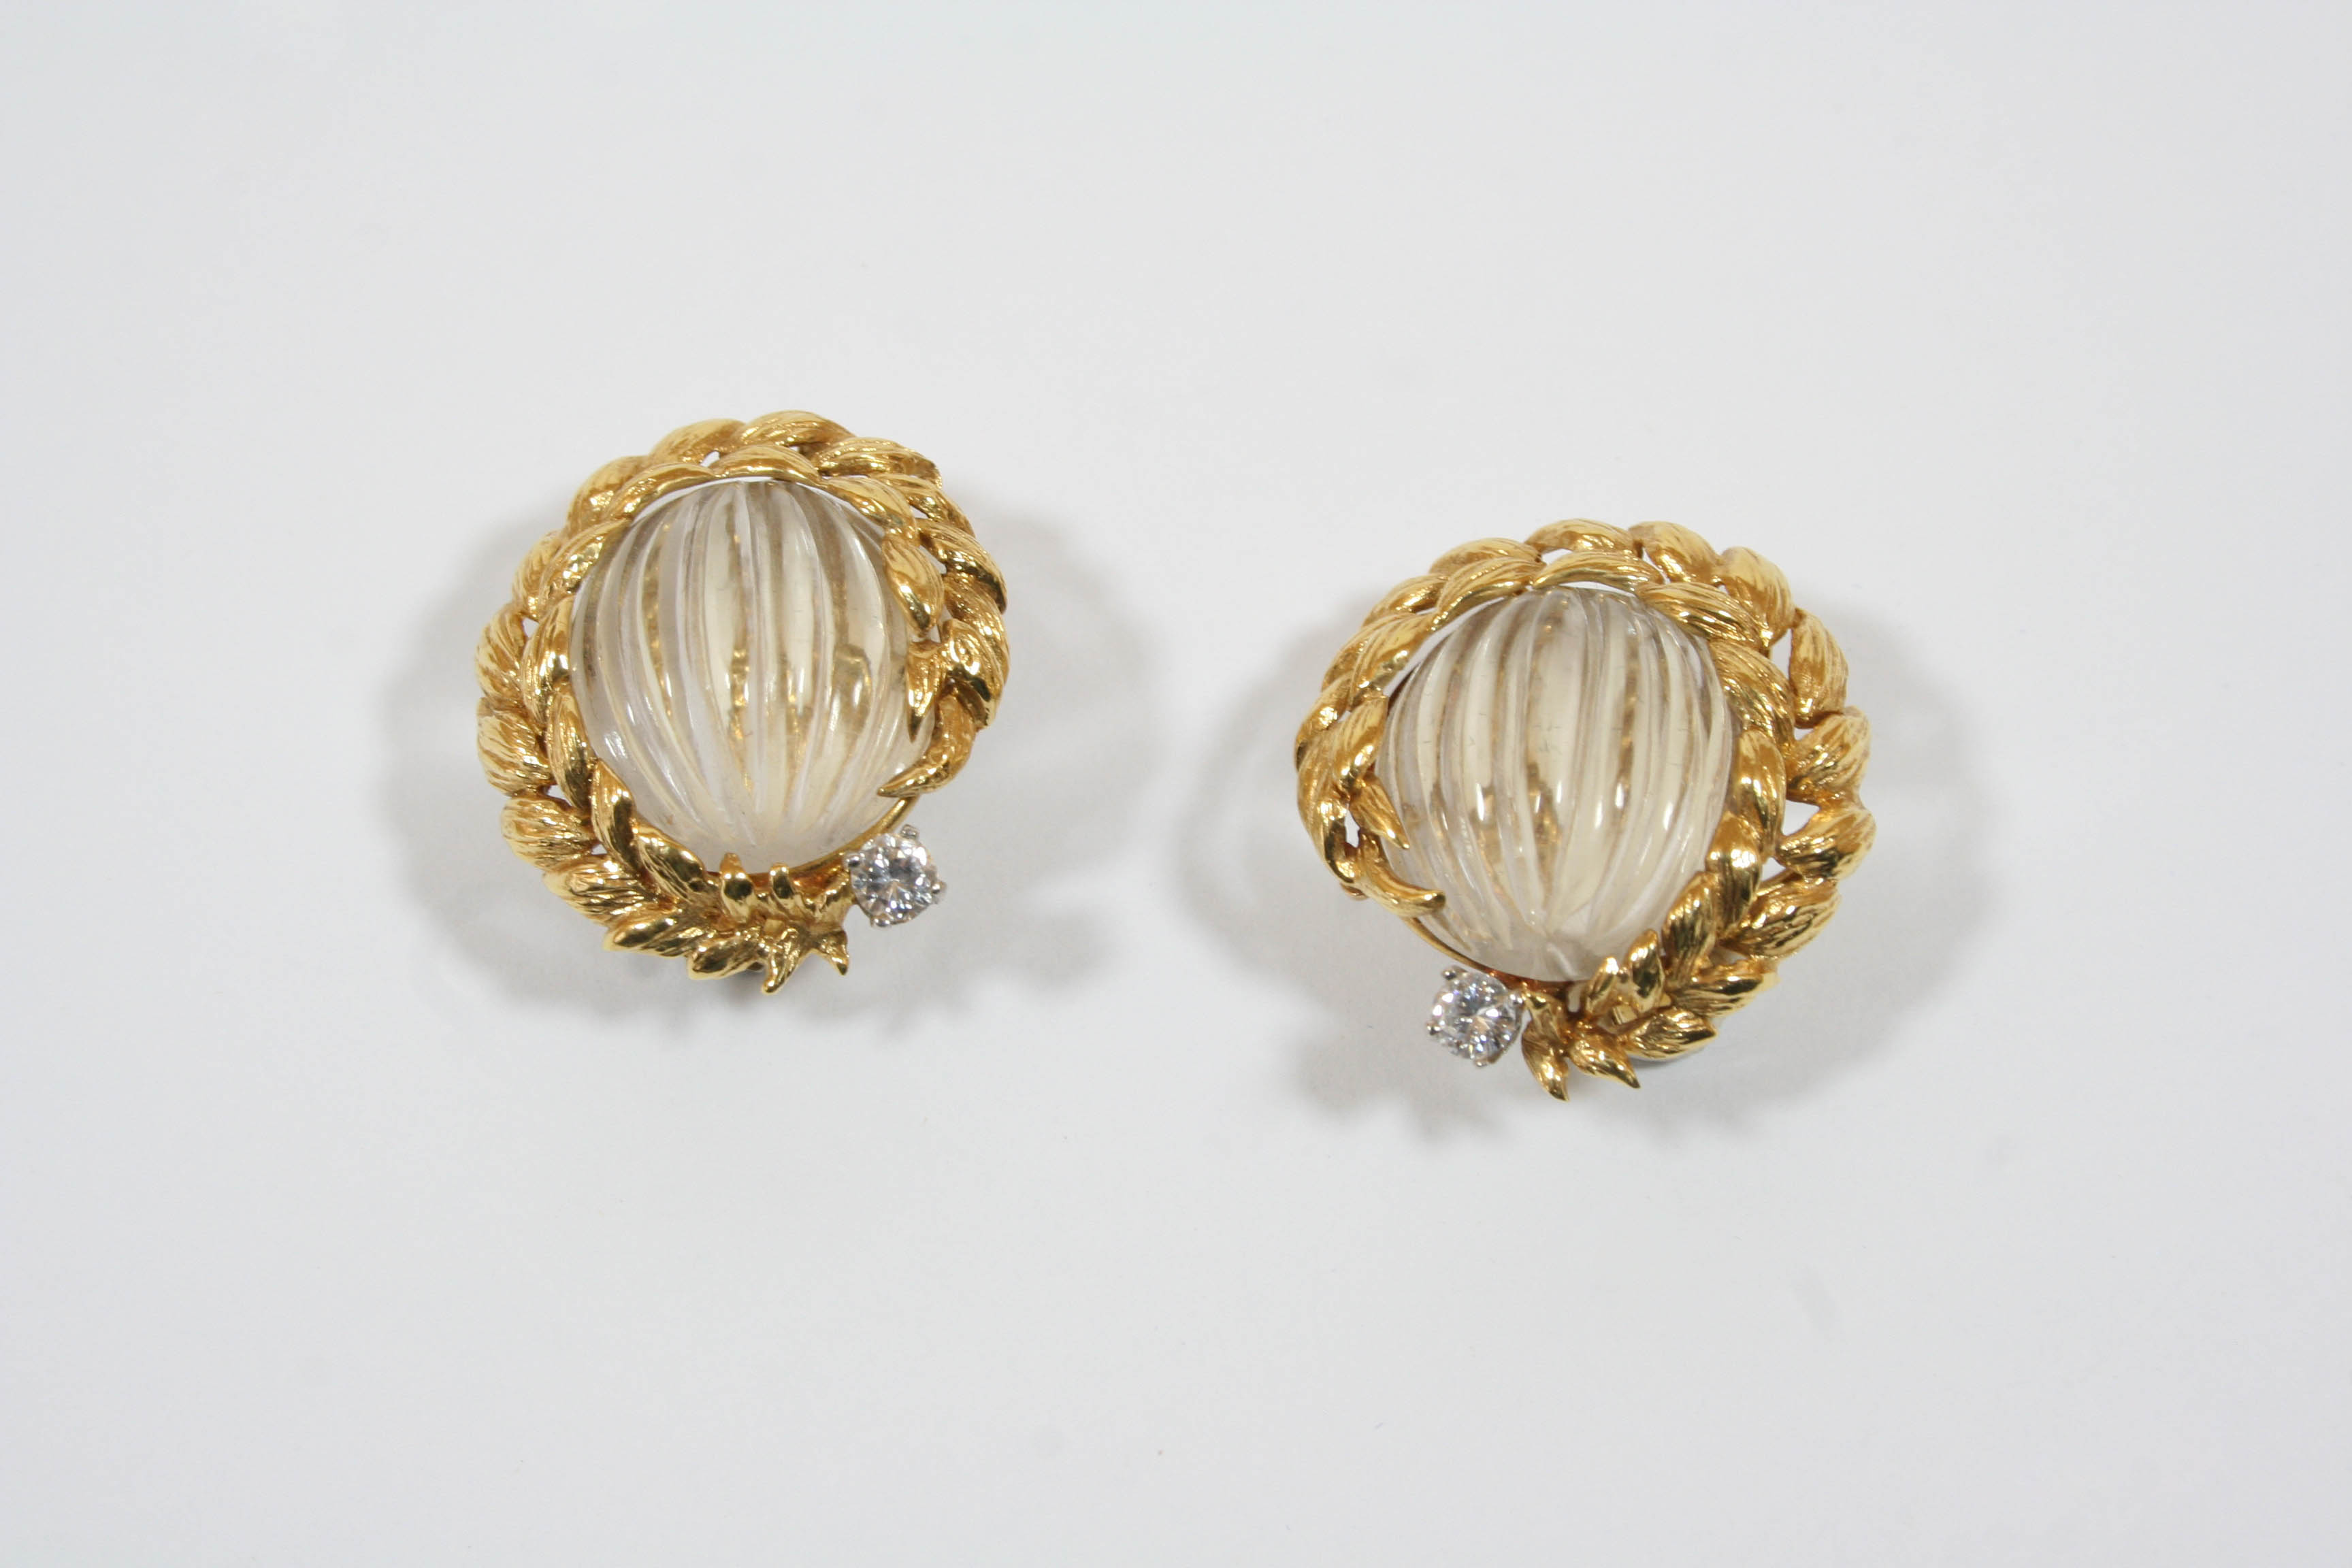 A PAIR OF 18CT. GOLD, CRYSTAL AND DIAMOND EARCLIPS BY DAVID WEBB each formed with an oval carved